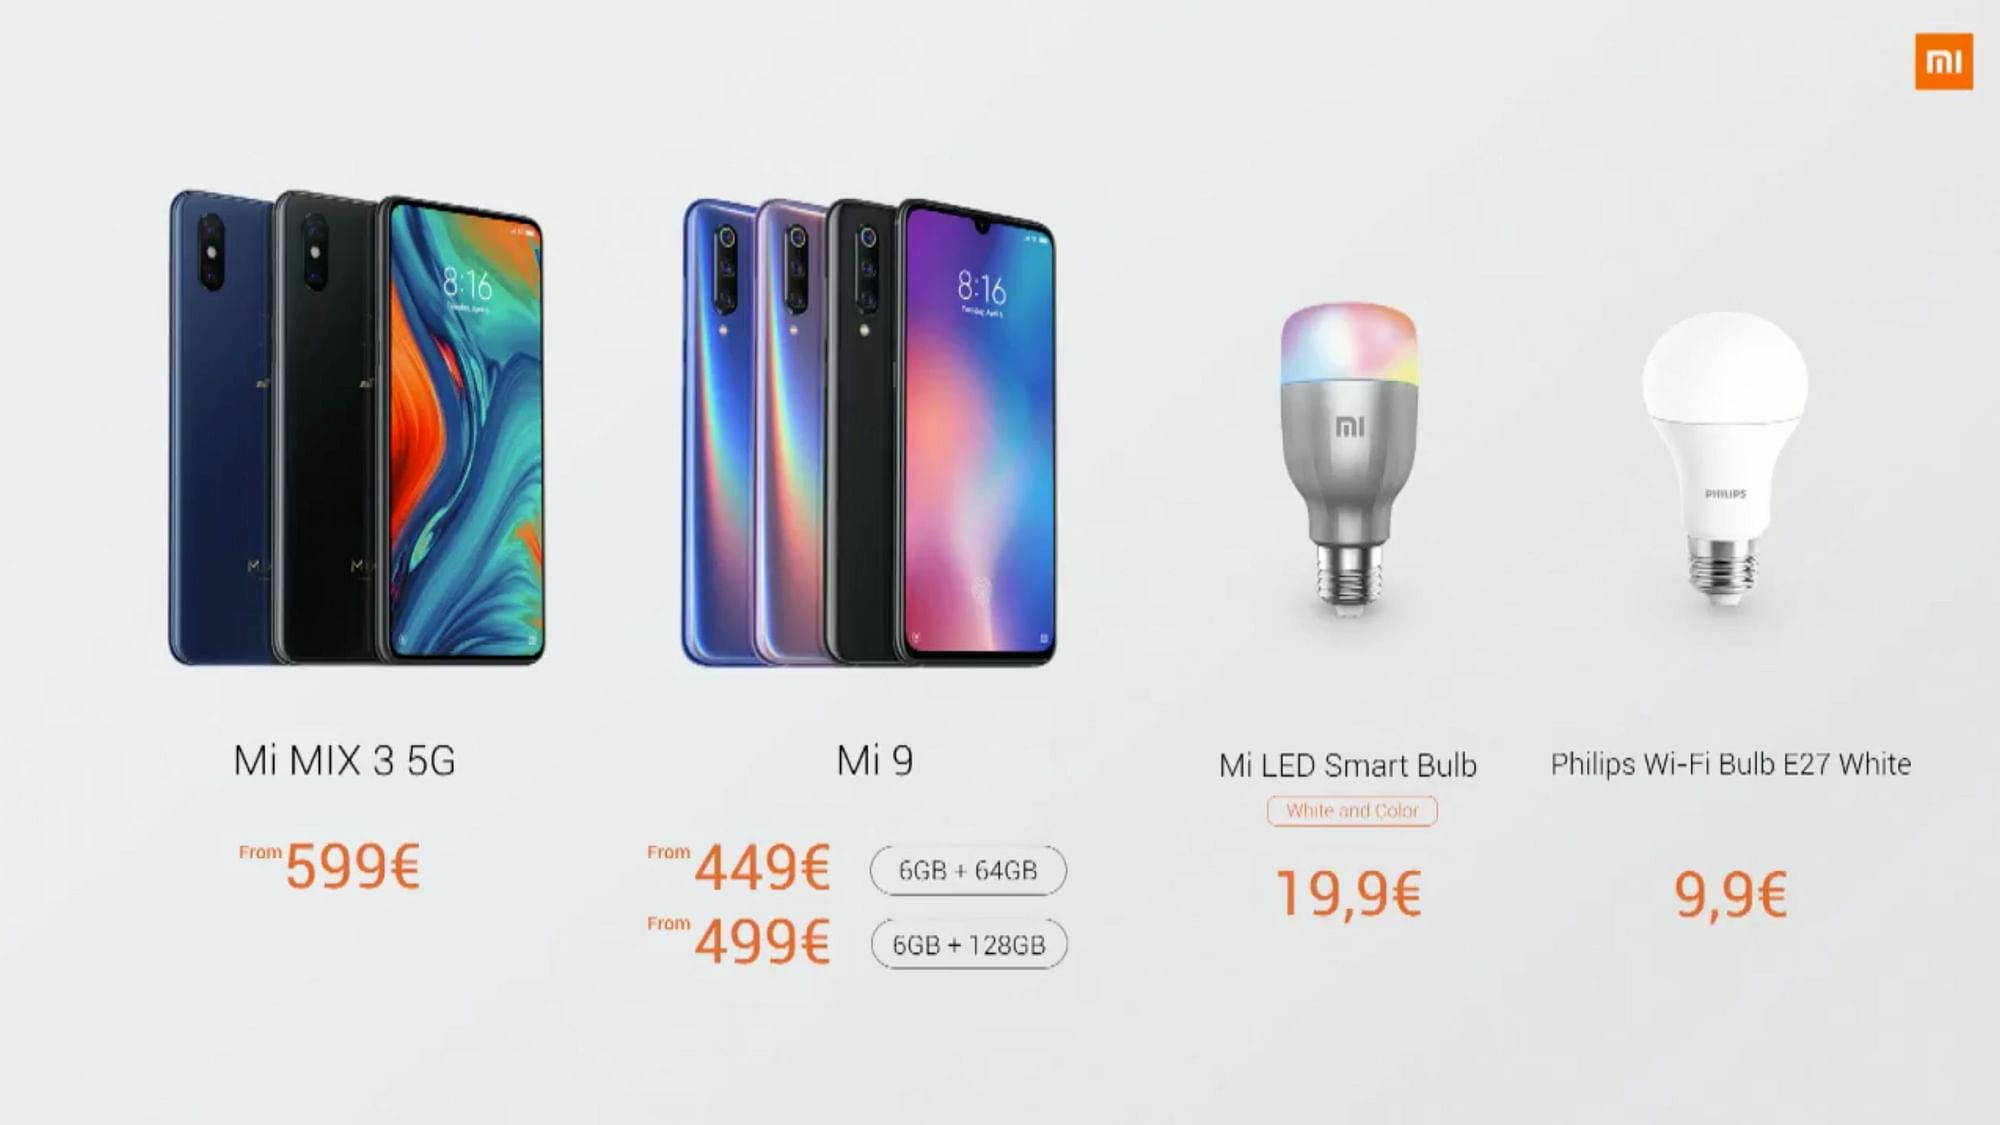 The new range of Xiaomi products for 2019.